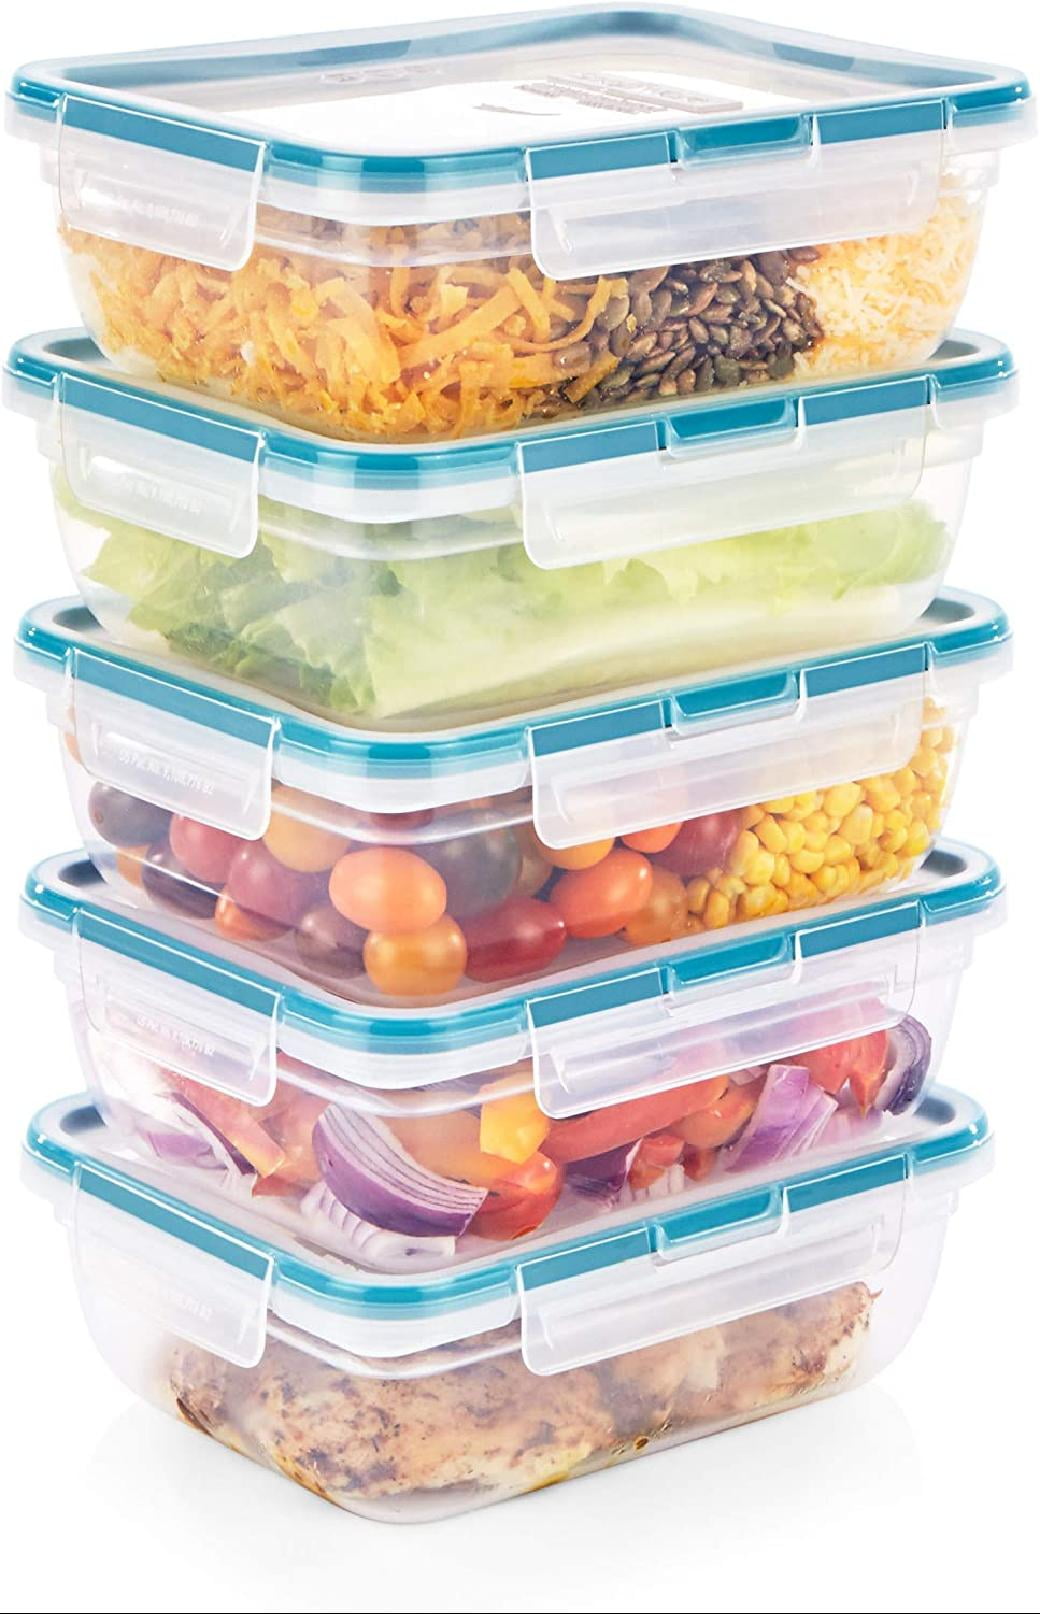 Total Solution® 2-pack Plastic Food Storage Container Set with Aqua Lids